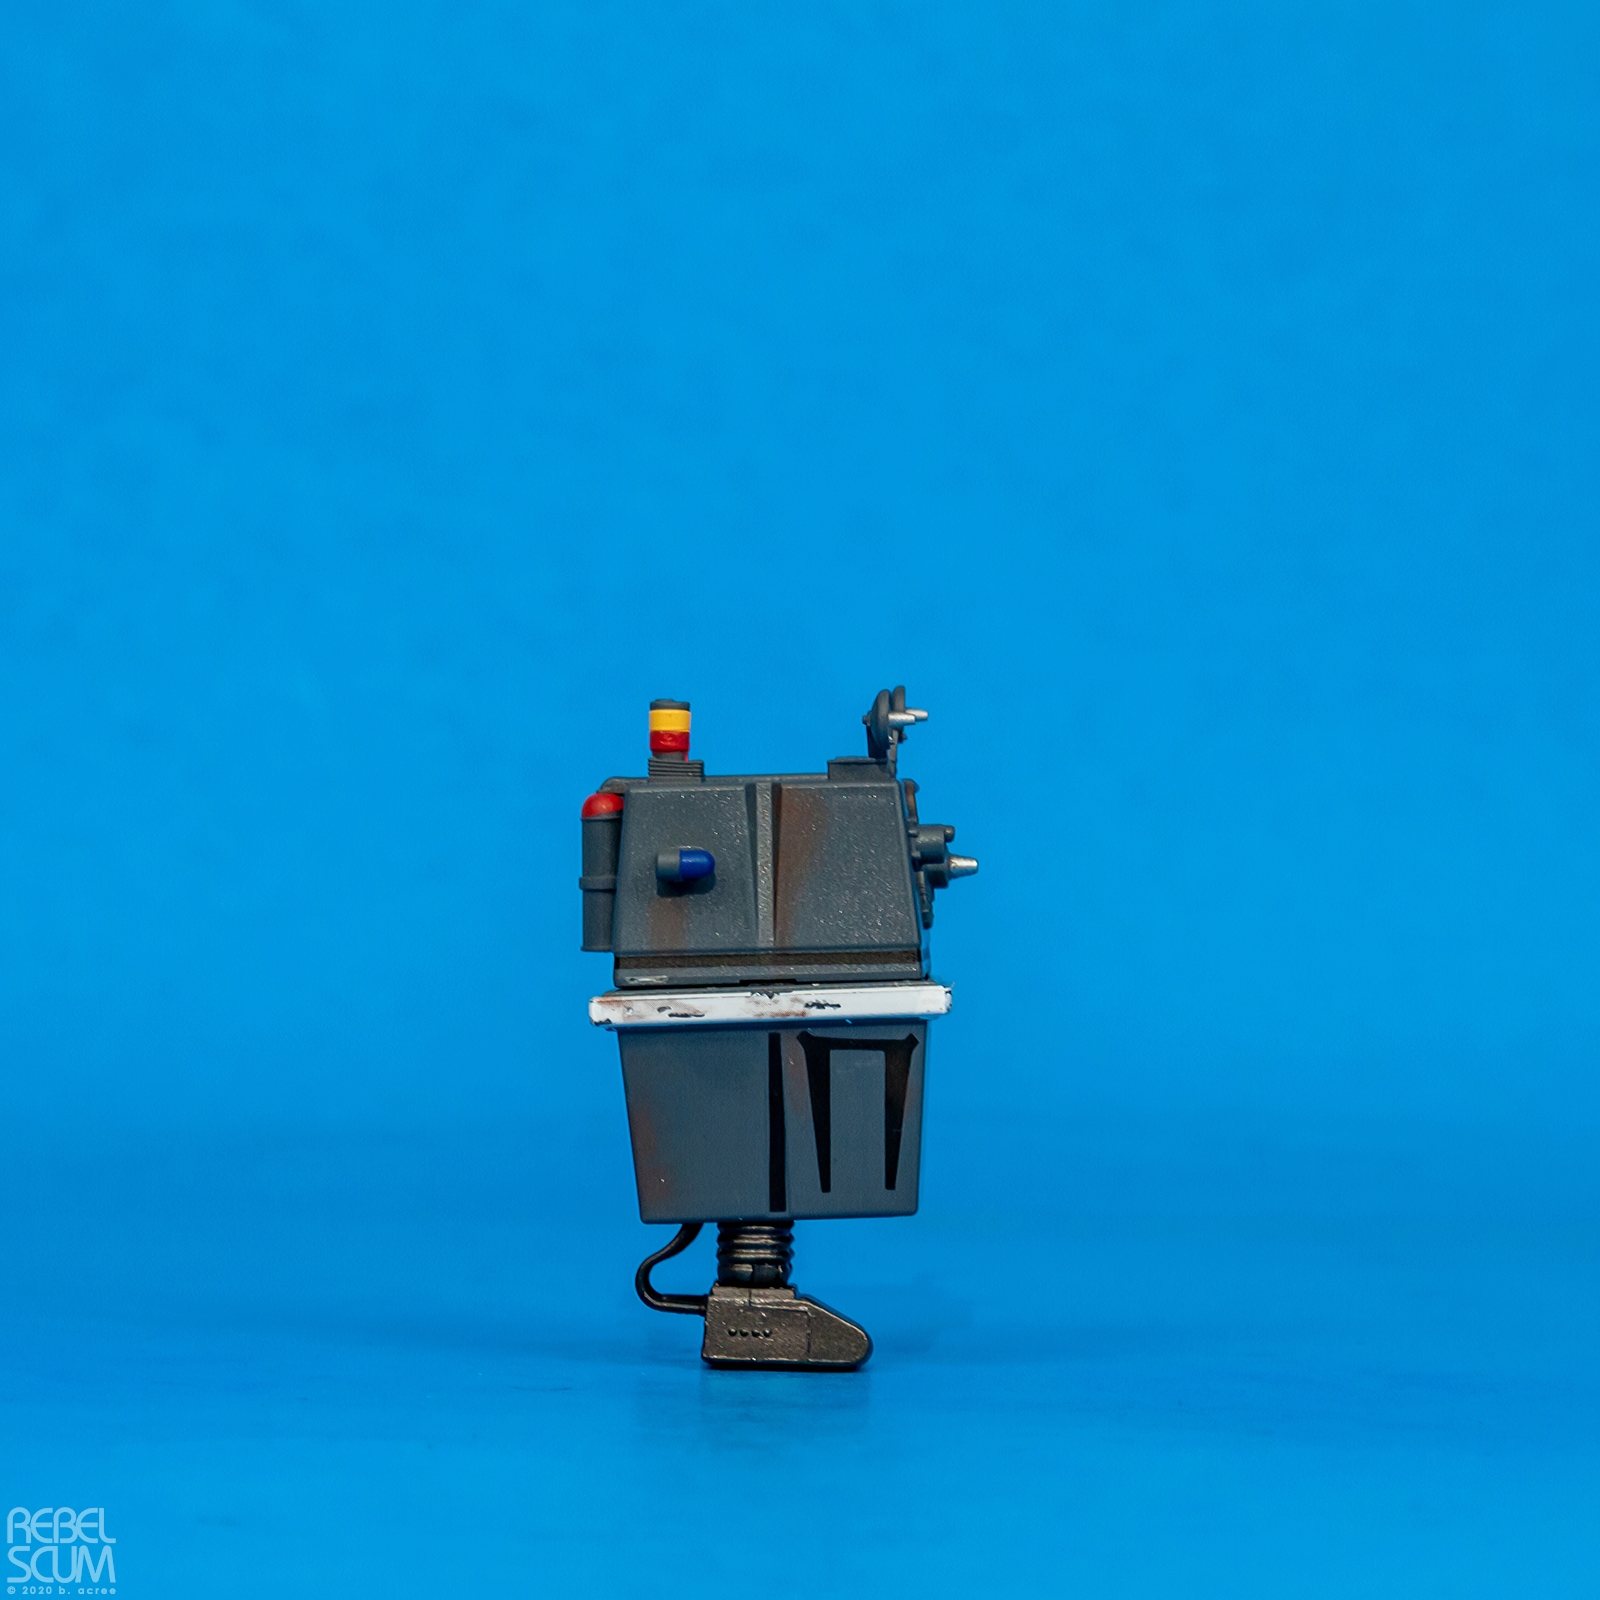 VC-167-The-Vintage-Collection-Power-Droid-003.jpg